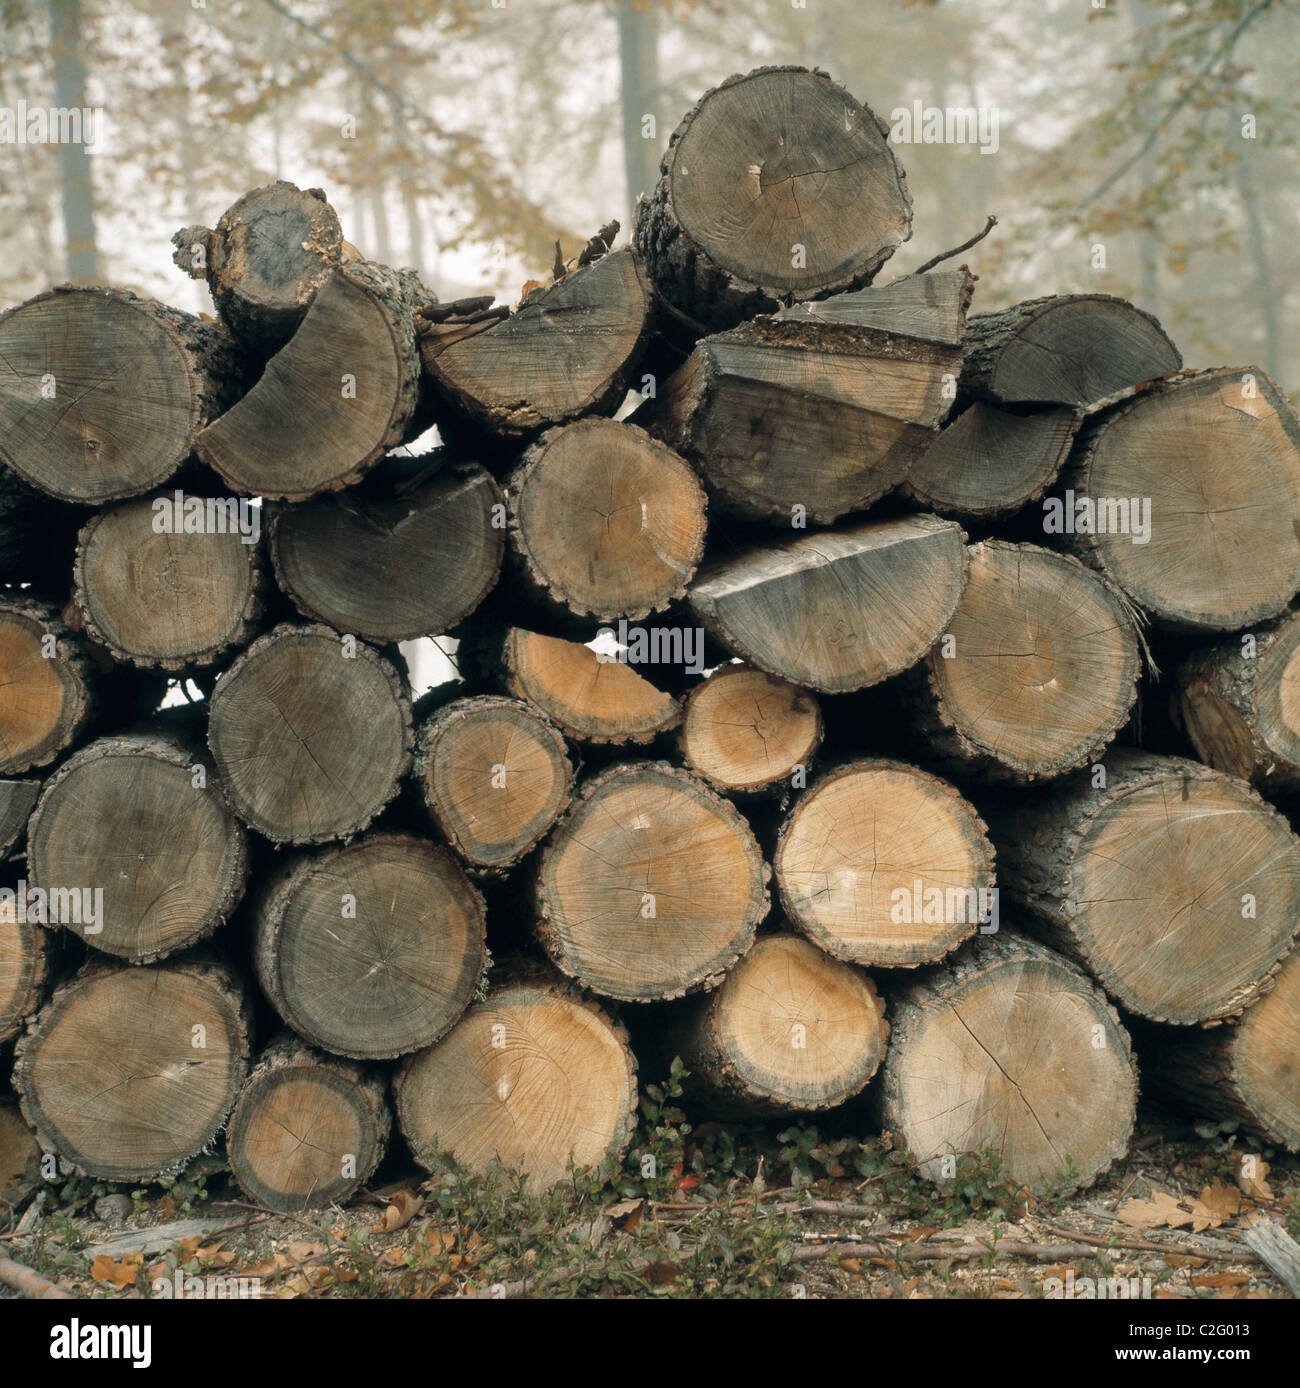 Seventies, deforestation, wood piling, tree logs, wooden blocks, firewood, Palatinate Forest, nature reserve Palatinate Forest, Rhineland-Palatinate Stock Photo